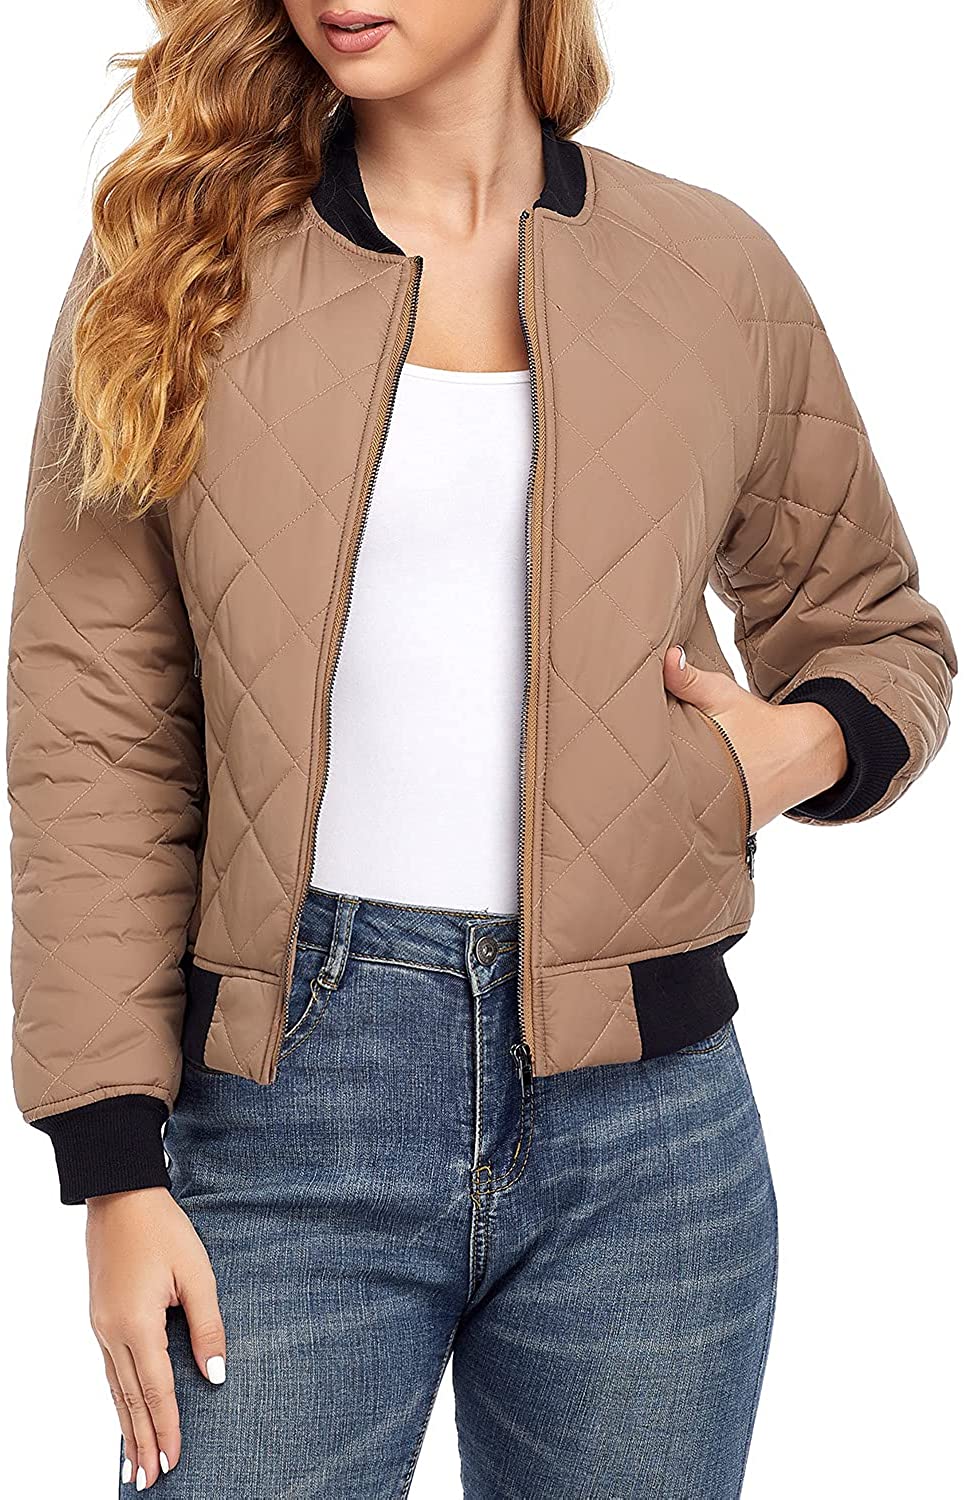 andy & natalie Womens Casual Jacket Quilted Lightweight Long Sleeve Zip up Raglan Bomber Jacket with Pockets 